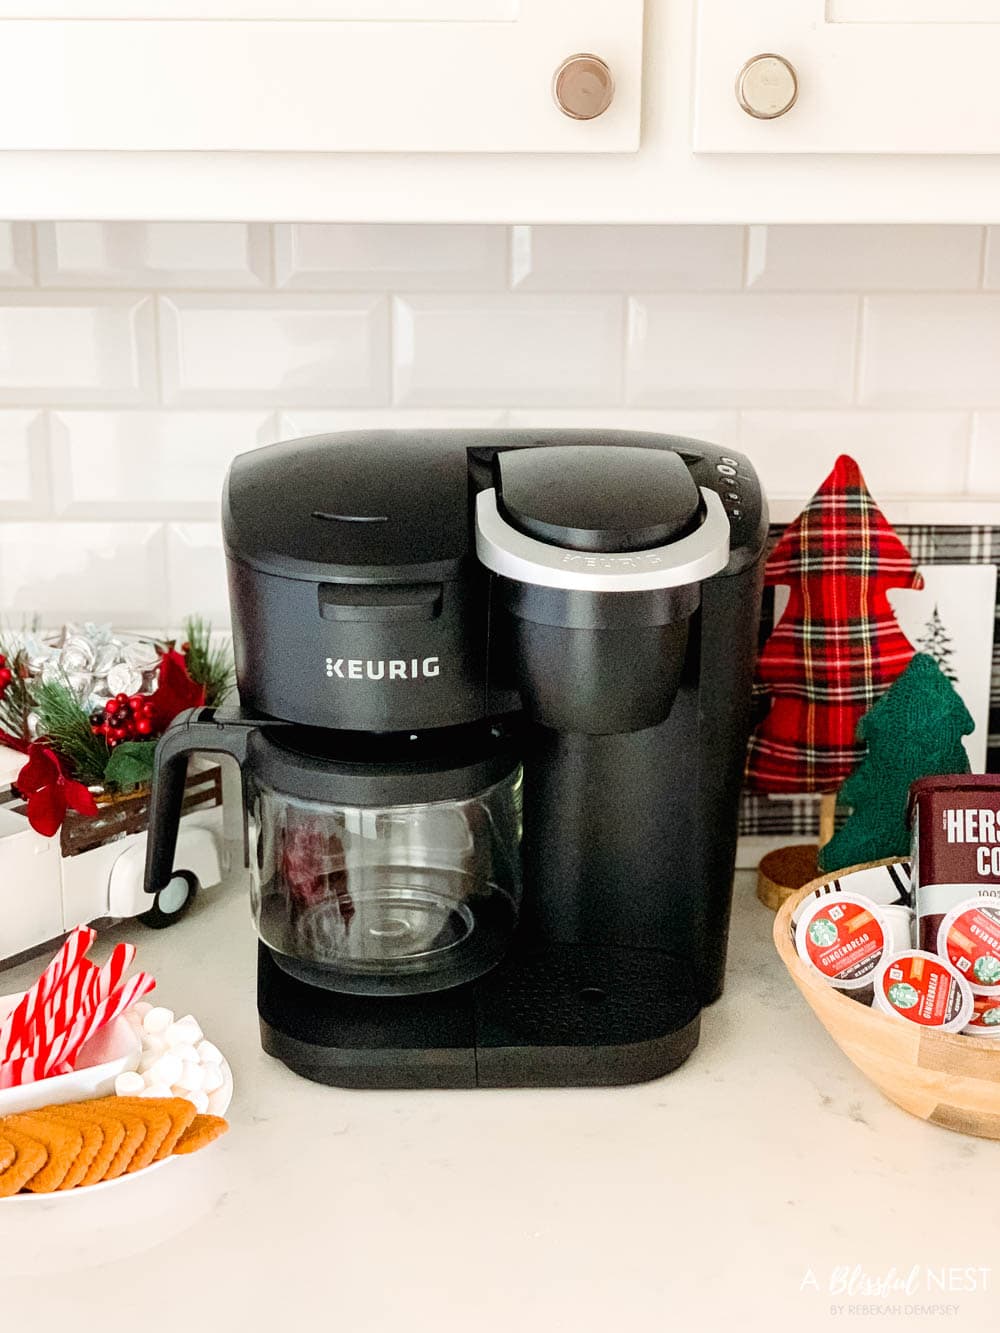 Black Keurig machine for a hot cocoa and coffee bar